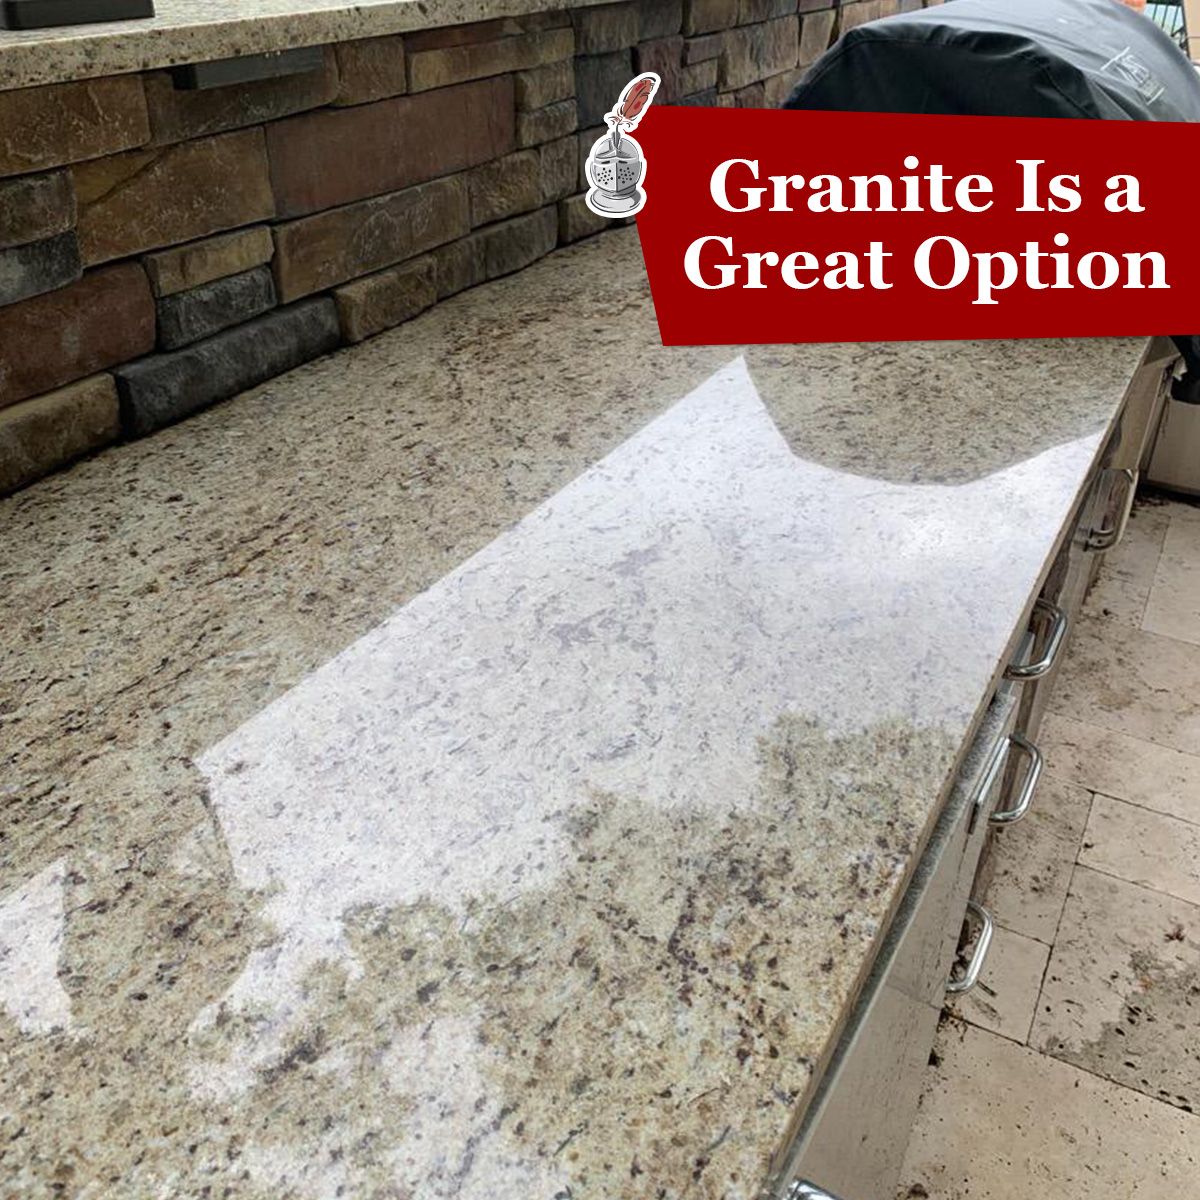 Granite Is a Great Option